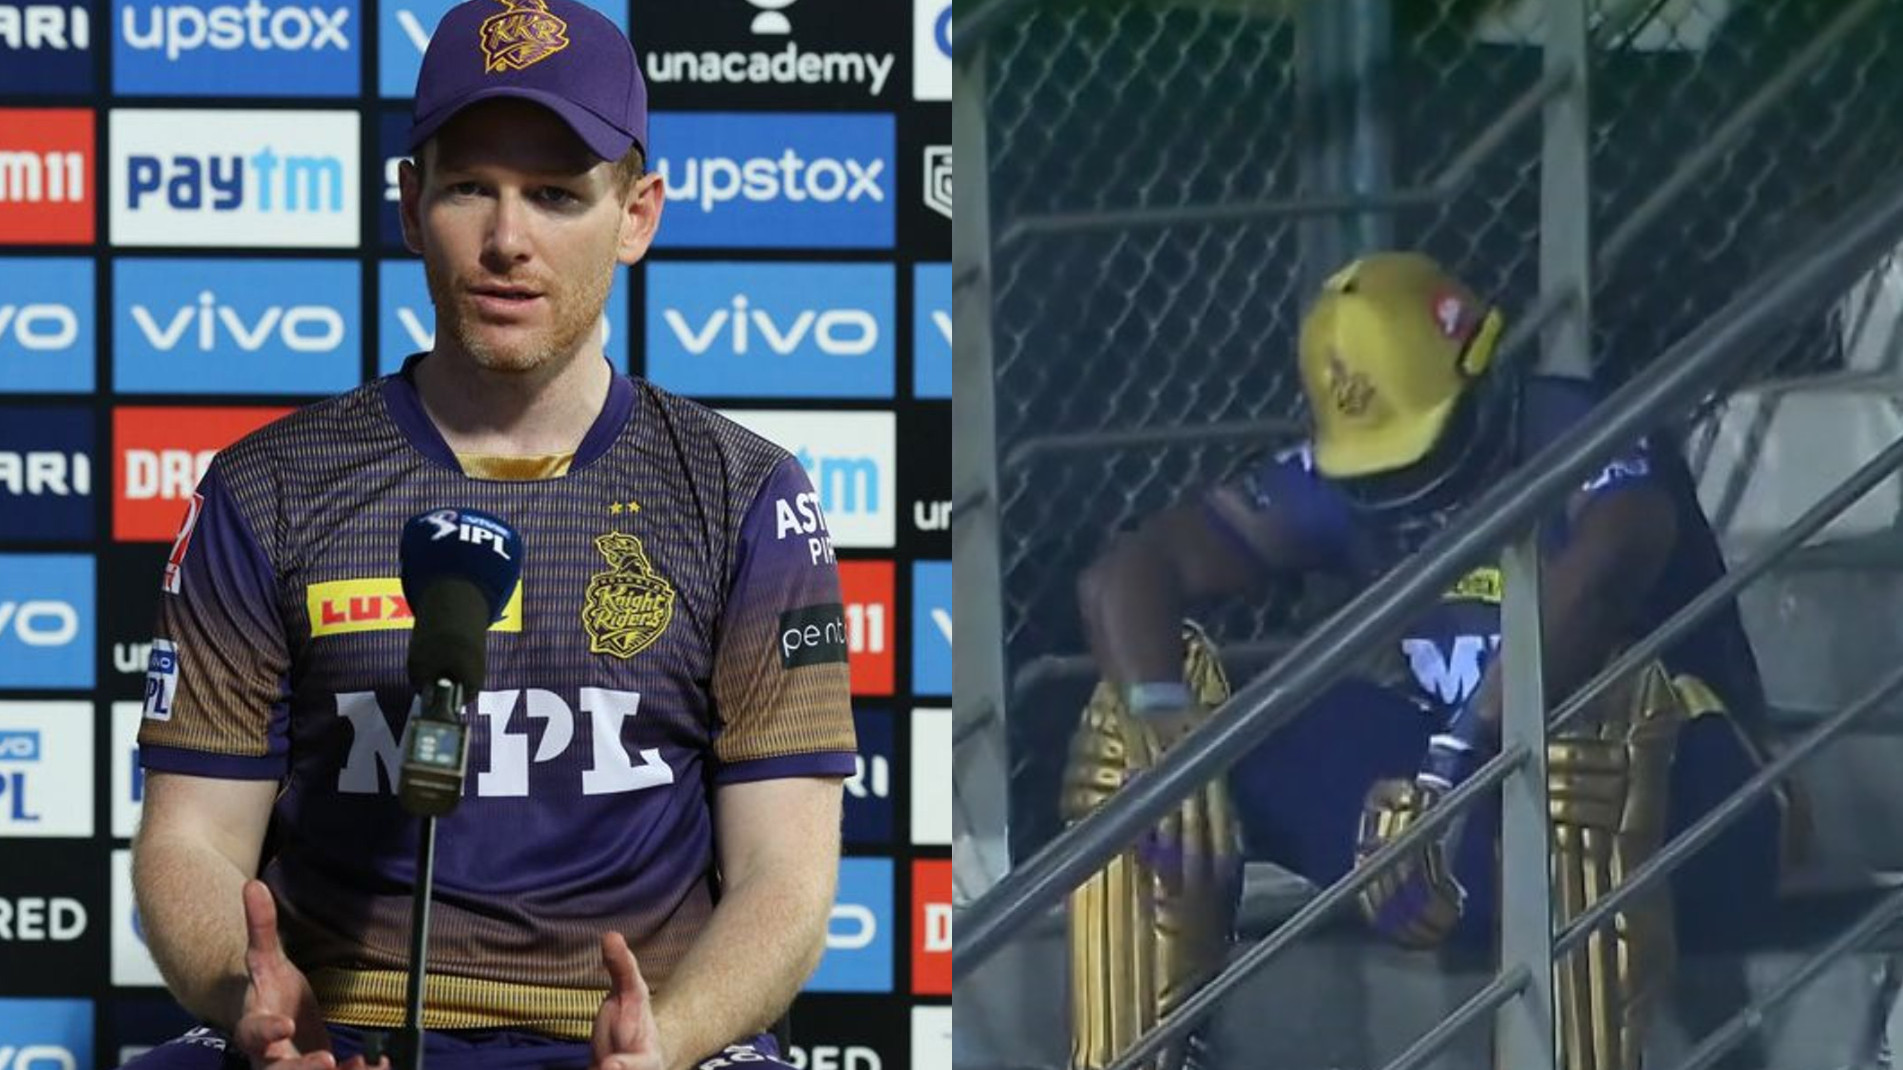 IPL 2021: Tend to stay away from Andre Russell after he got out, says KKR skipper Eoin Morgan